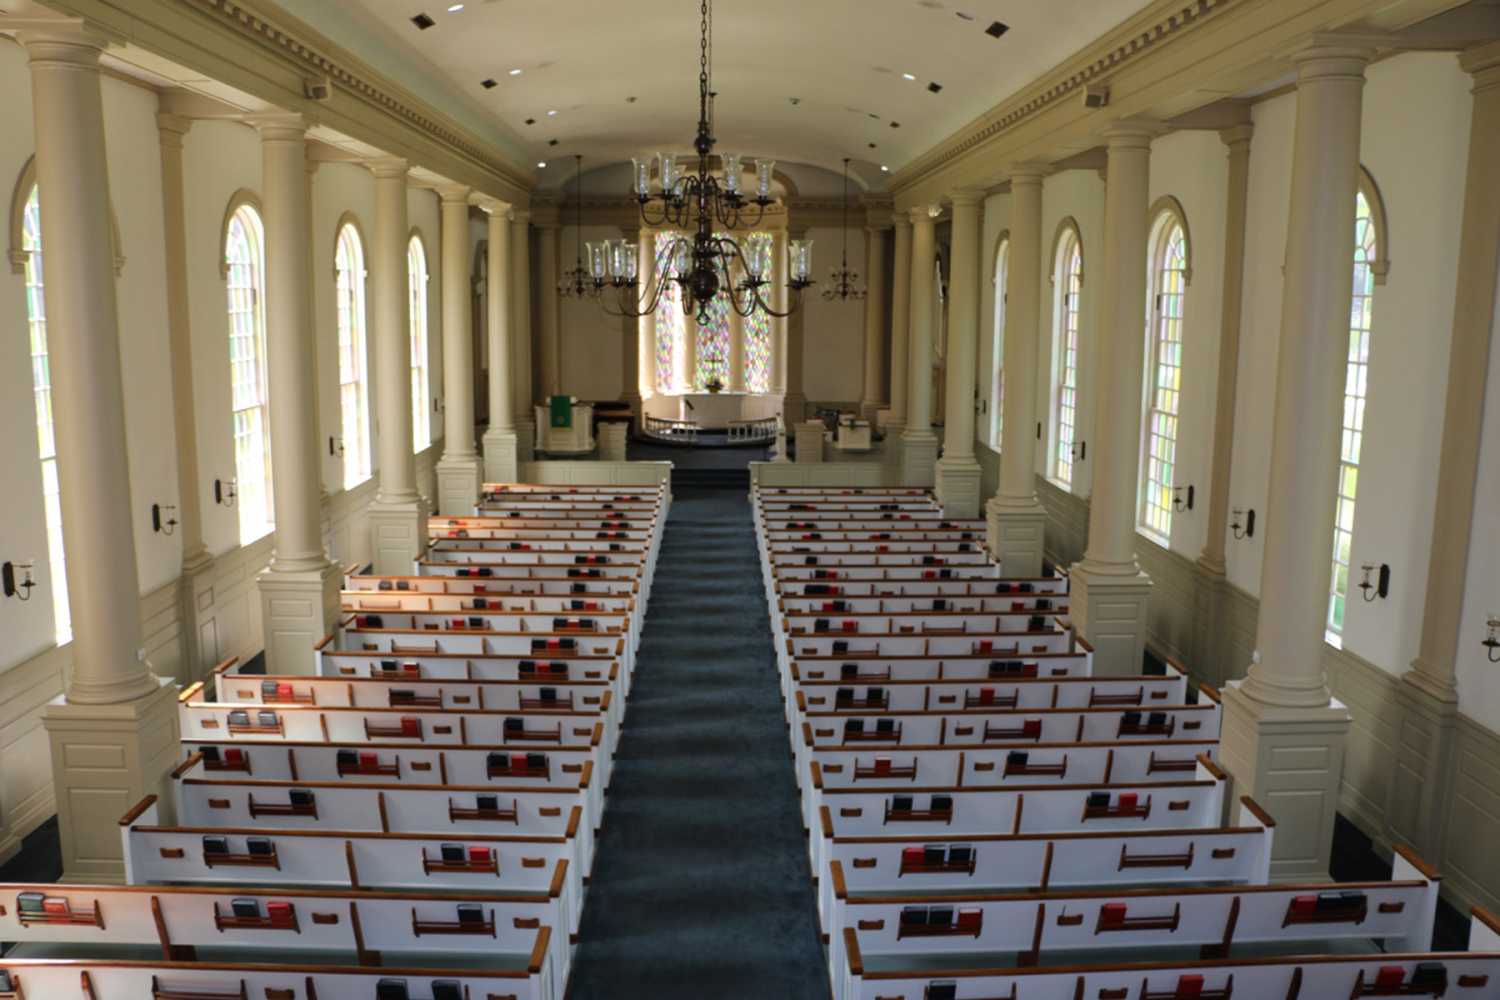 Memorial Chapel at Emory & Henry College